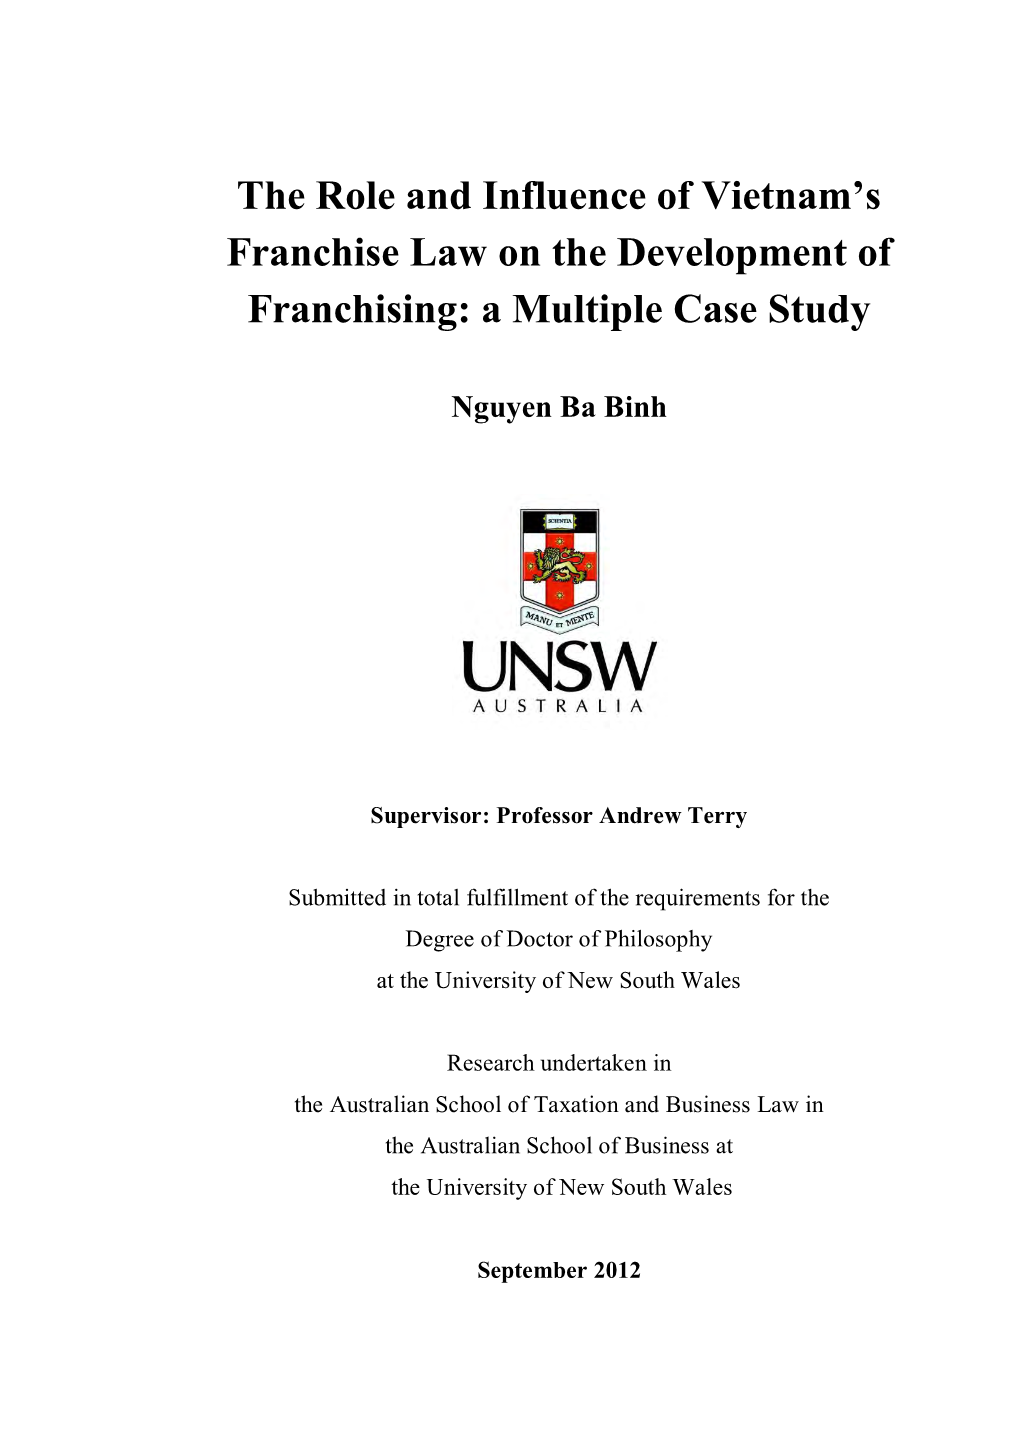 The Role and Influence of Vietnam's Franchise Law on The